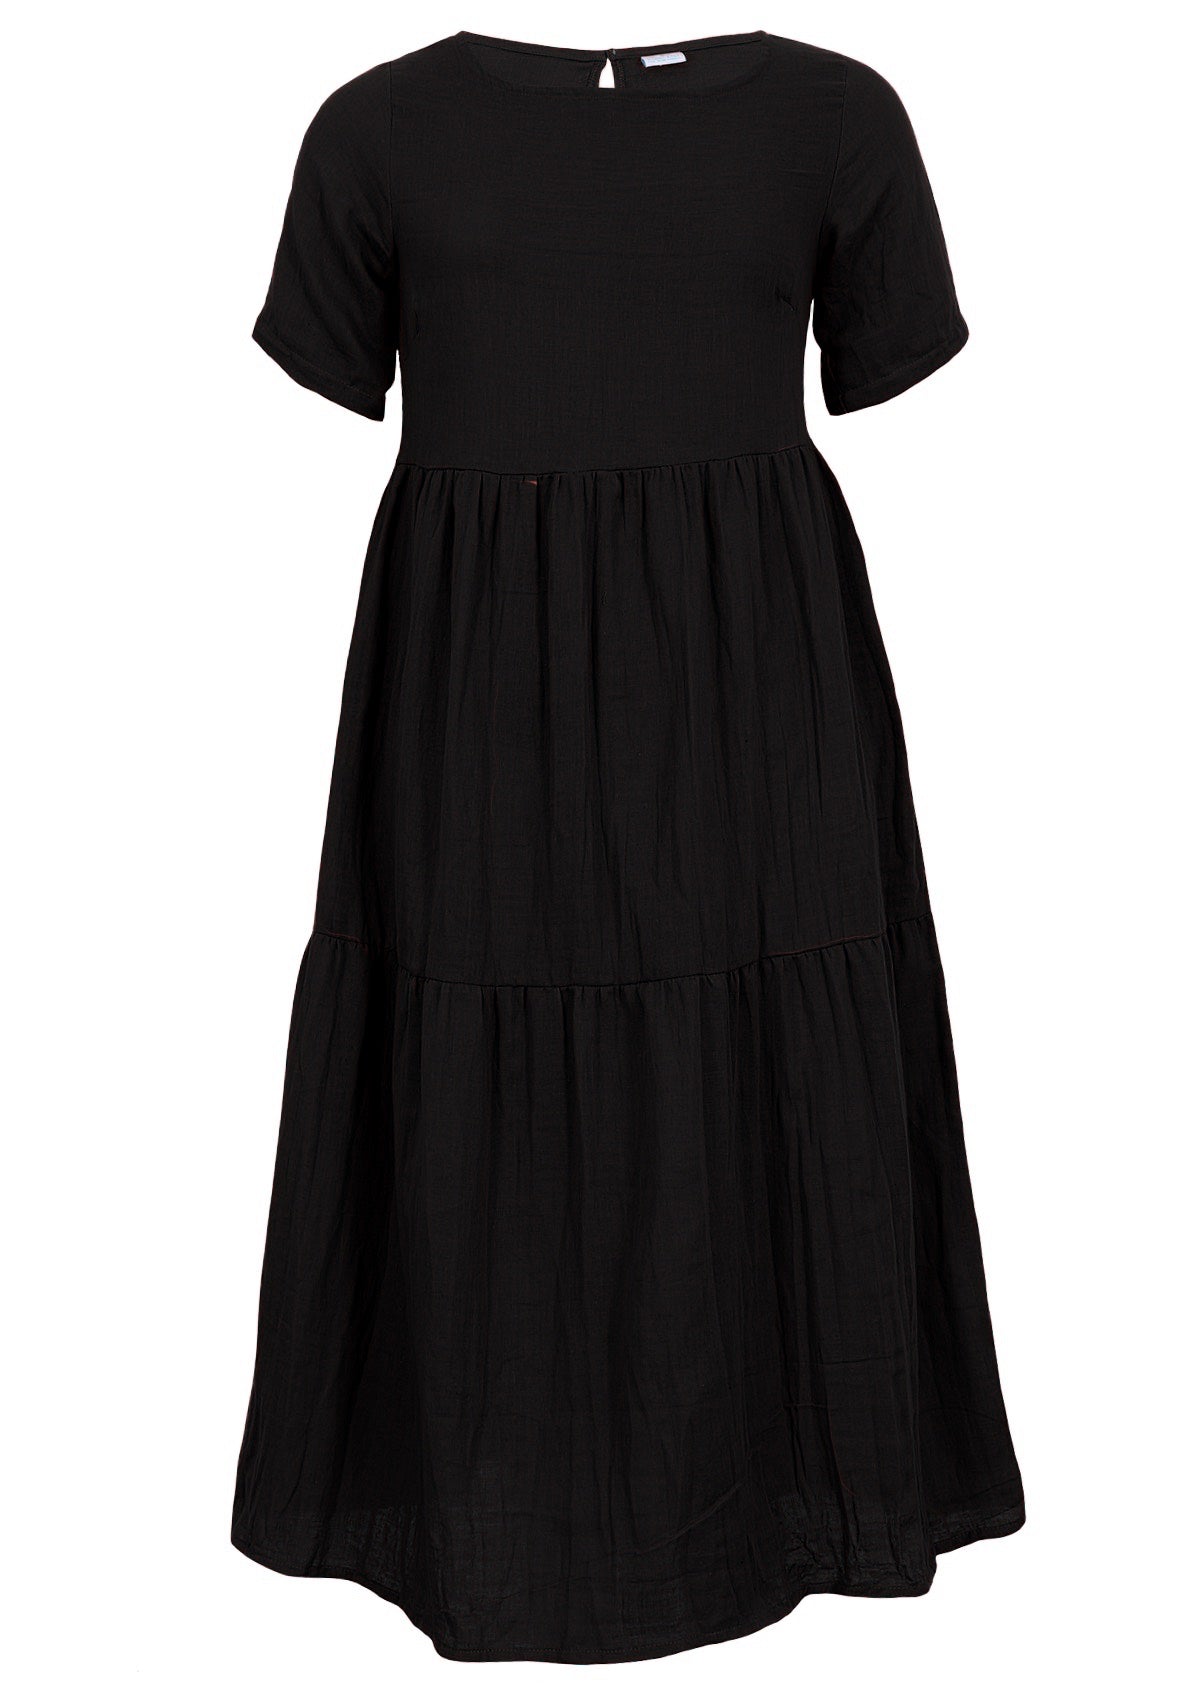 Black dress made from 2 layers of lightweight cotton gauze